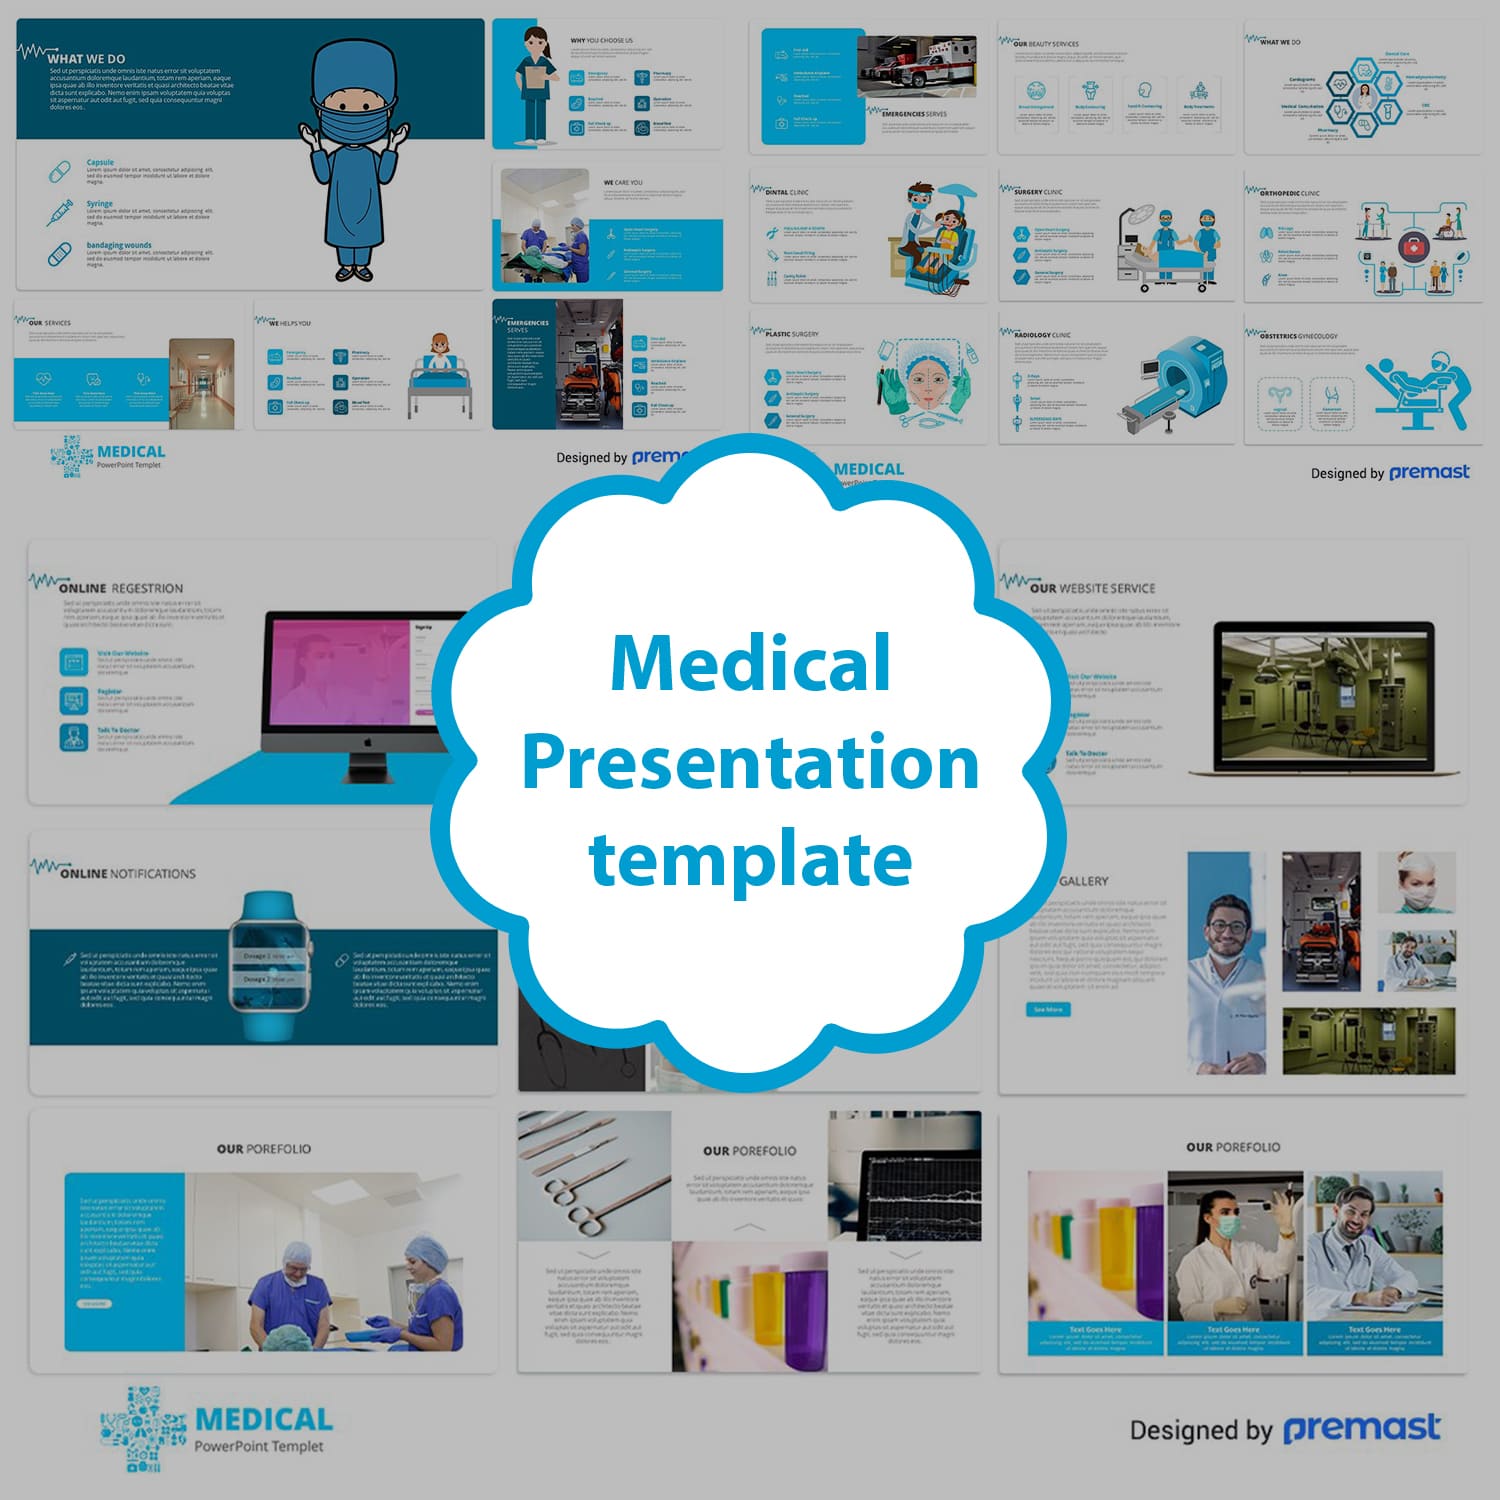 Medical Presentation Template - Preview.